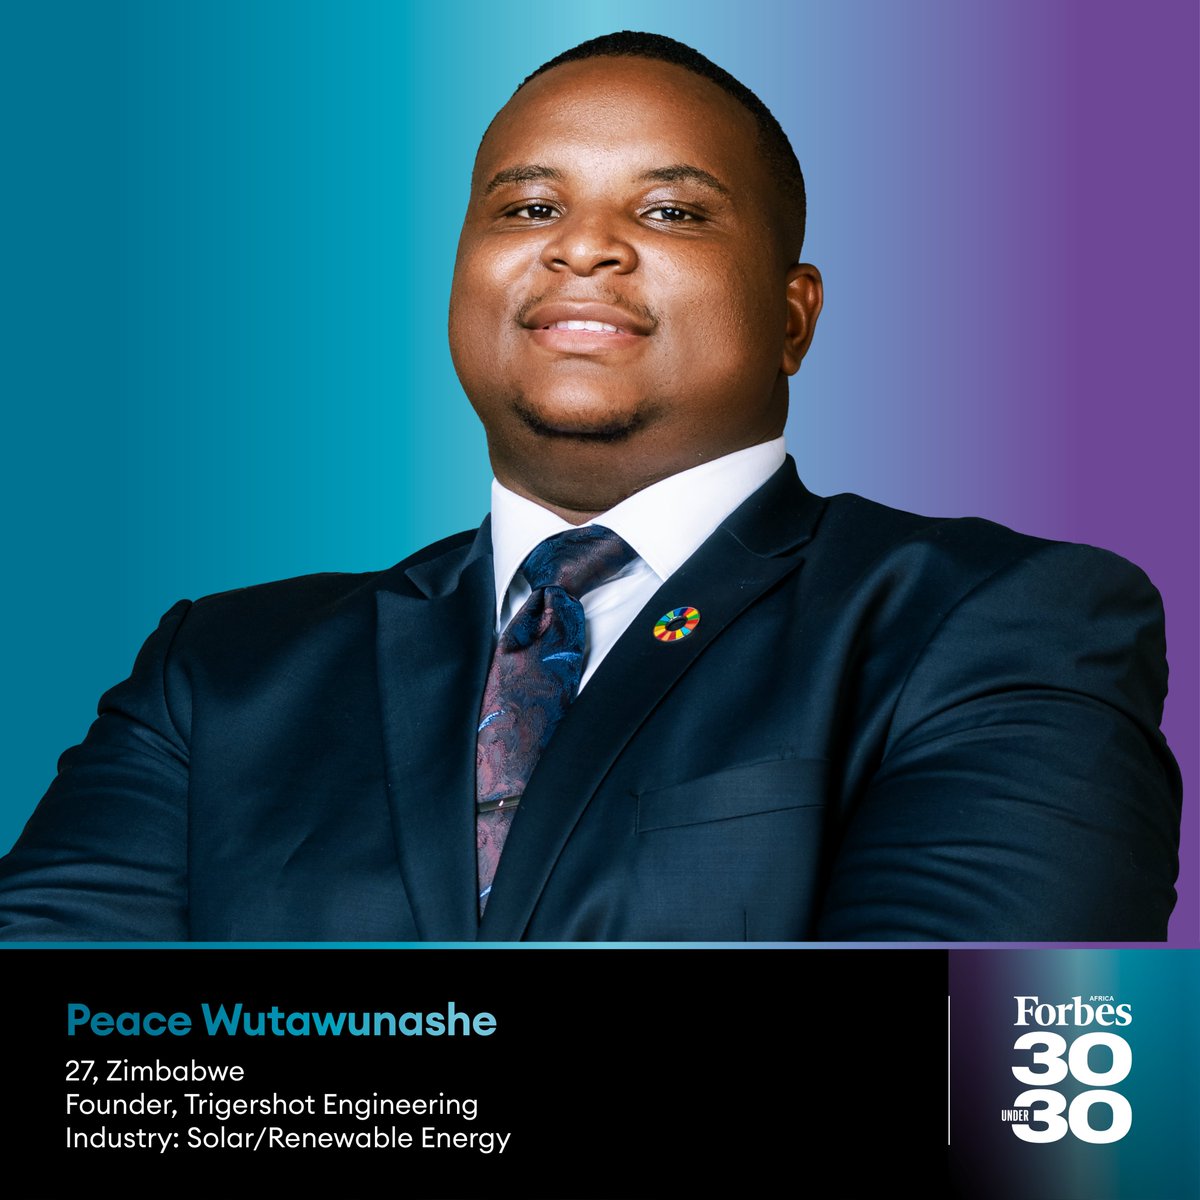 #ADecadeofUnder30
Having witnessed various energy crises growing up, including seeing rural communities struggle to access basic amenities like electricity and water, Peace Wutawunashe sought to use his first-hand experience to solve these challenges.

Read more on Peace…